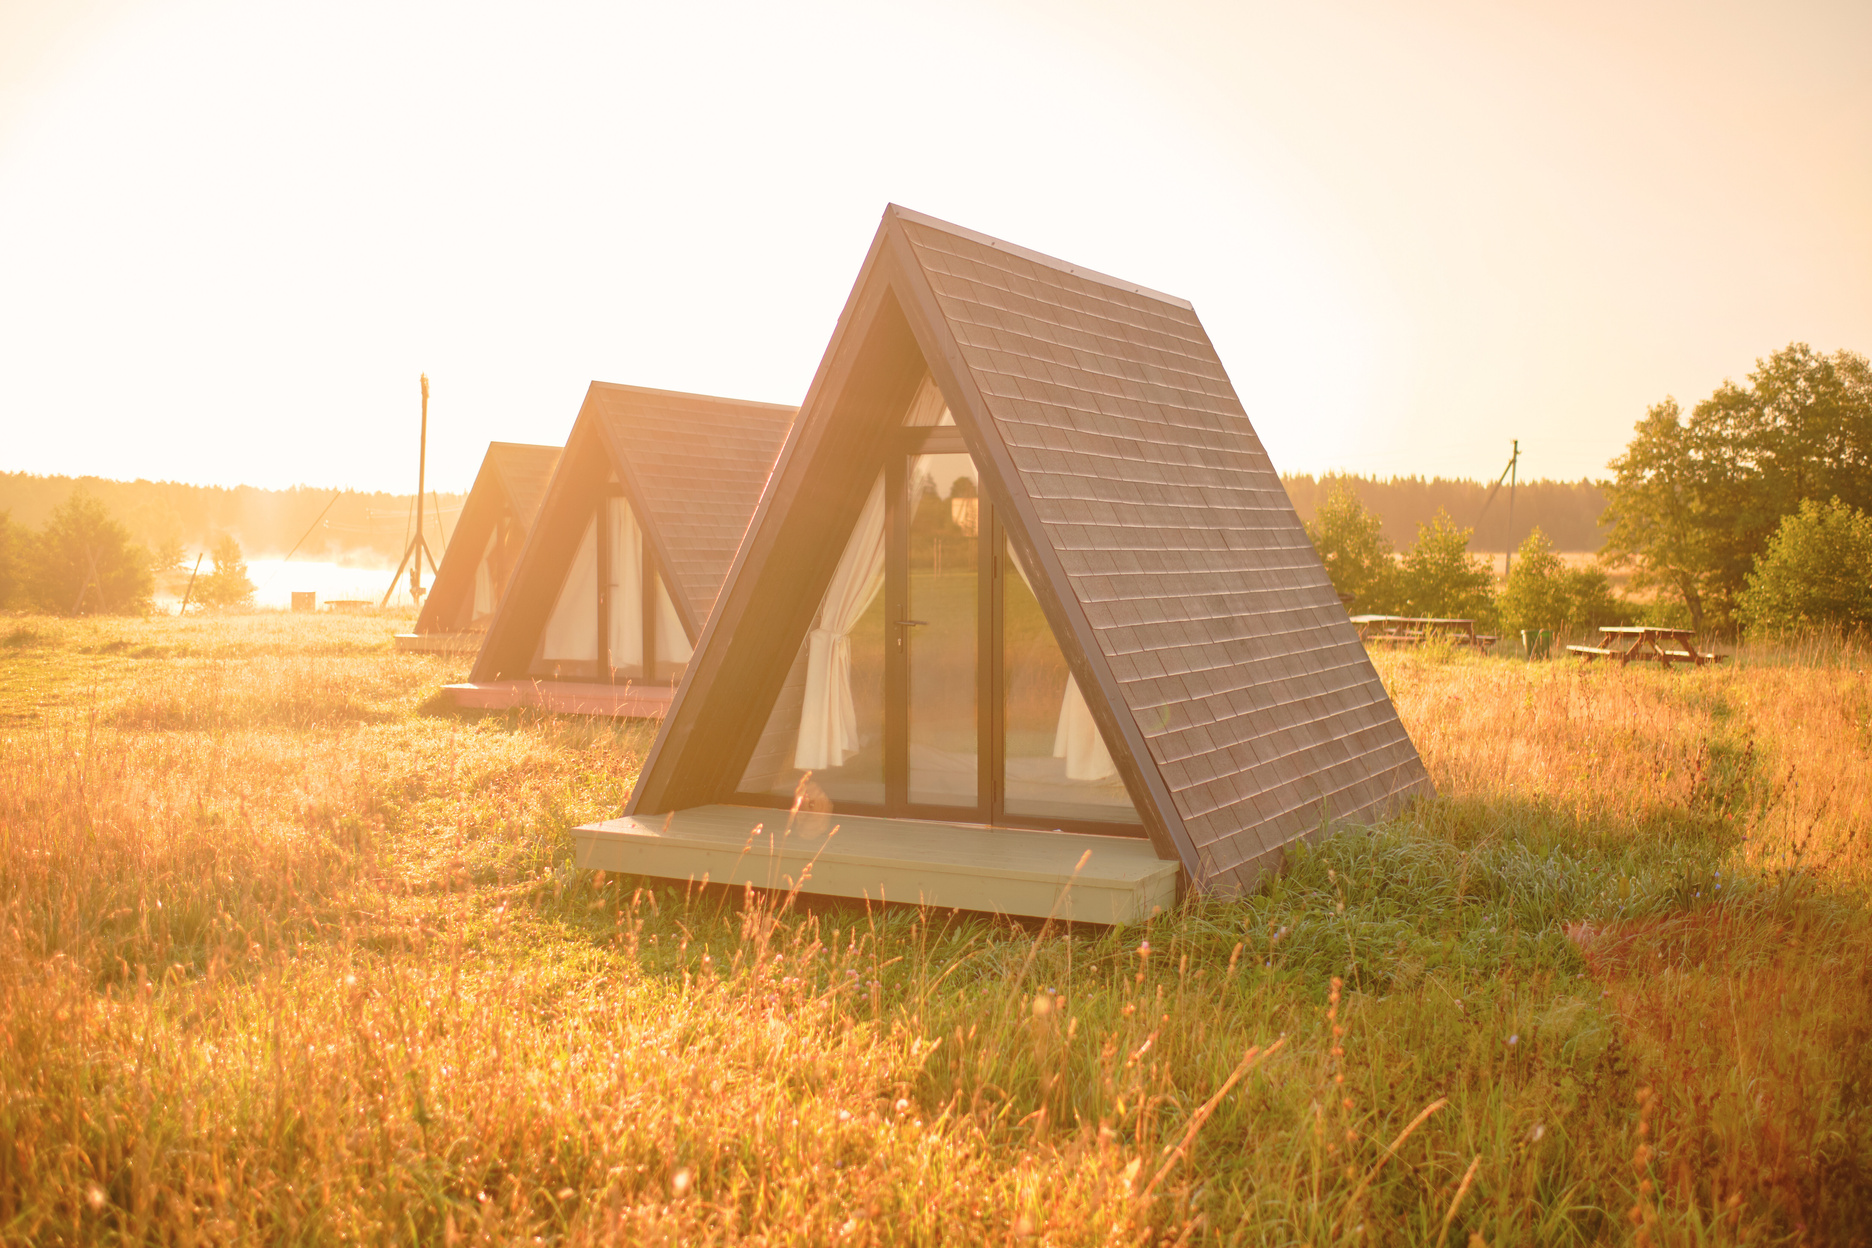 three small cabins in a grassy field with the sun setting behind them